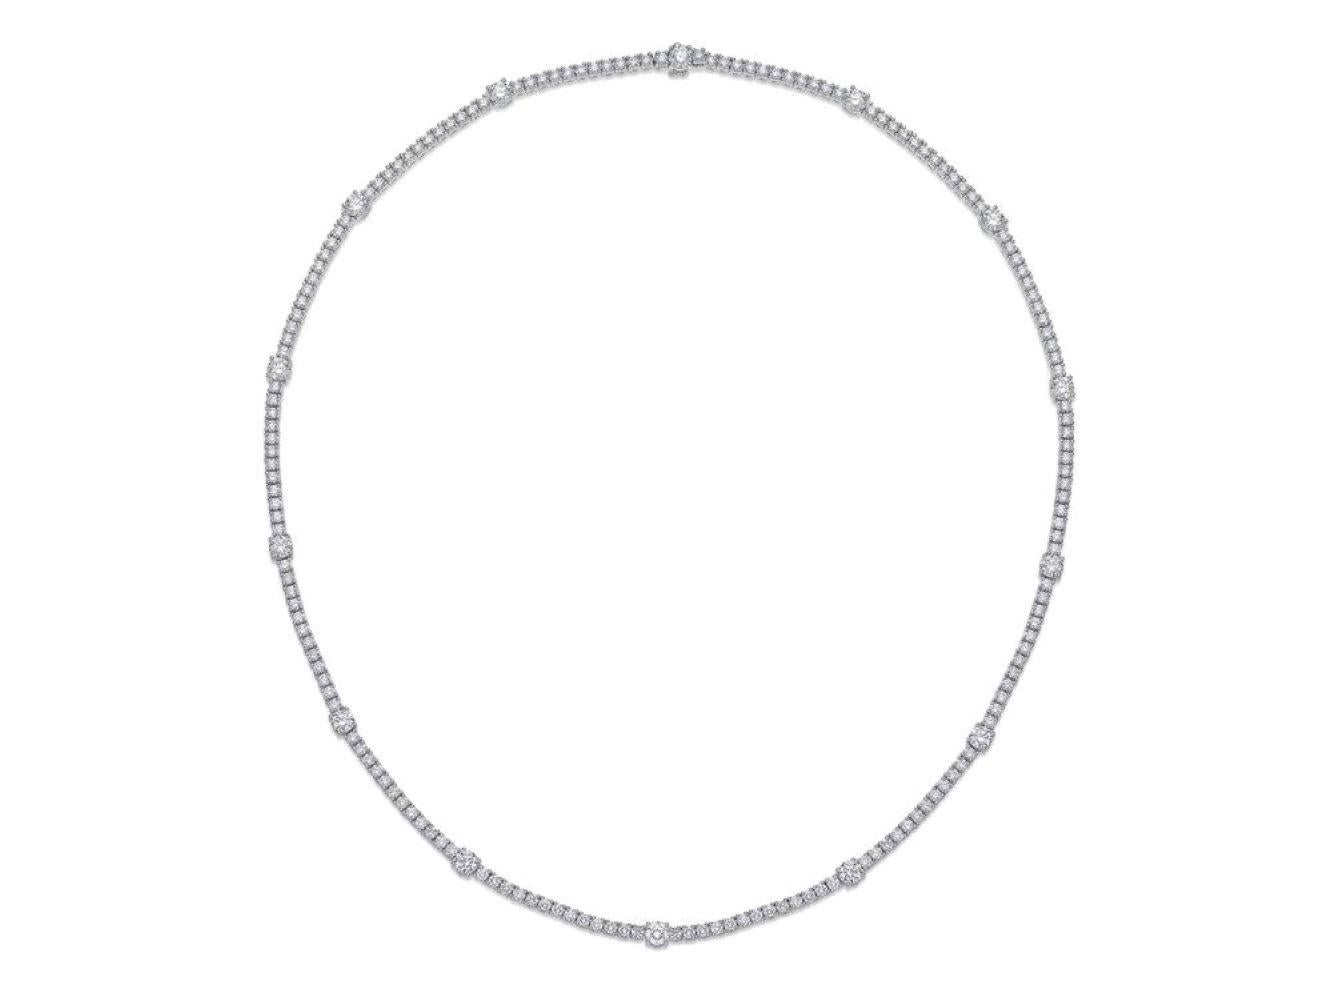 This 18 karat white gold diamond station tennis necklace by Memoire is composed of 184 round brilliant cut diamonds with a total weight of 6.42 carats. The stones boast F color and VS1 – VS2 Clarity with ideal cut and polish by Hearts on Fire. The